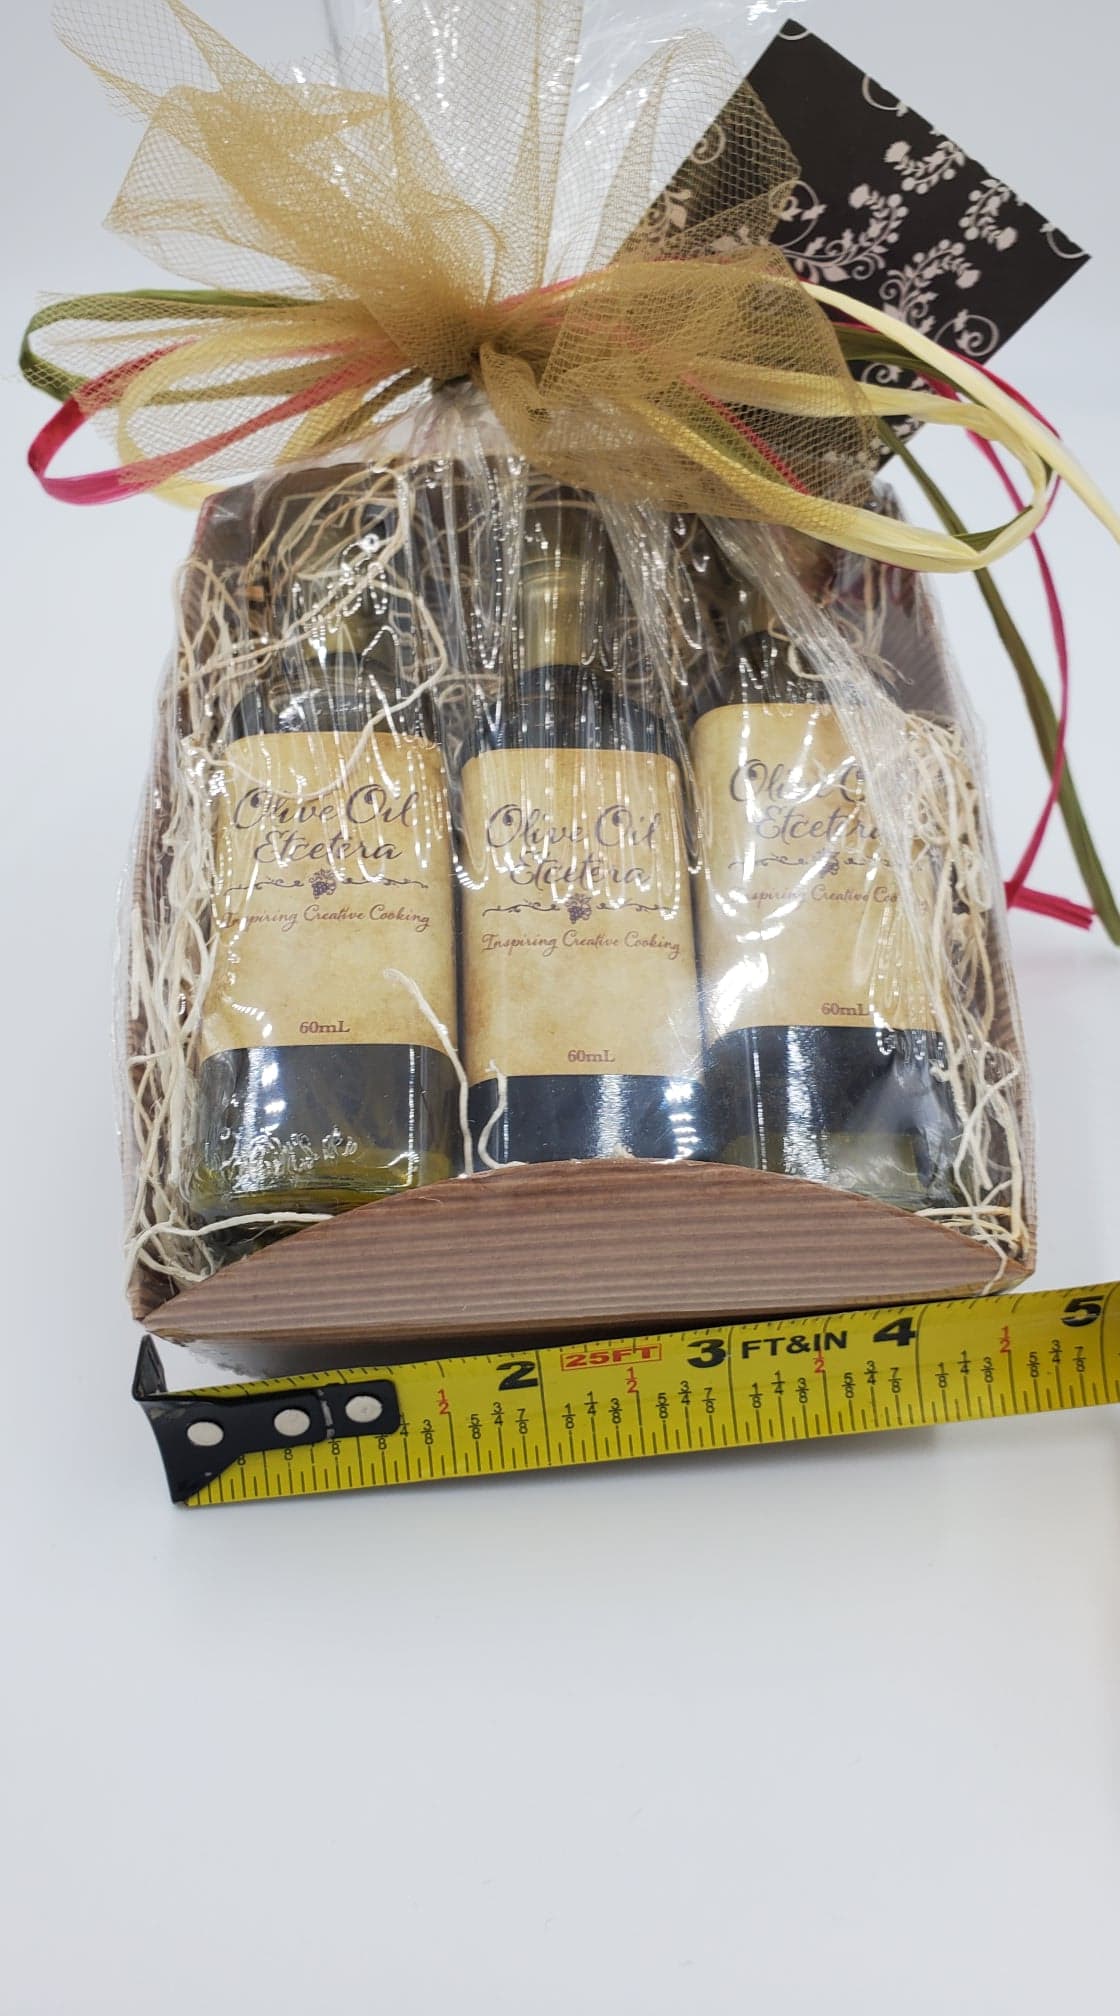 60 ml gift set of Garlic herb olive oil, Arbequina Olive Oil and 18 year Balsamic vinegar in a mini brown tray 